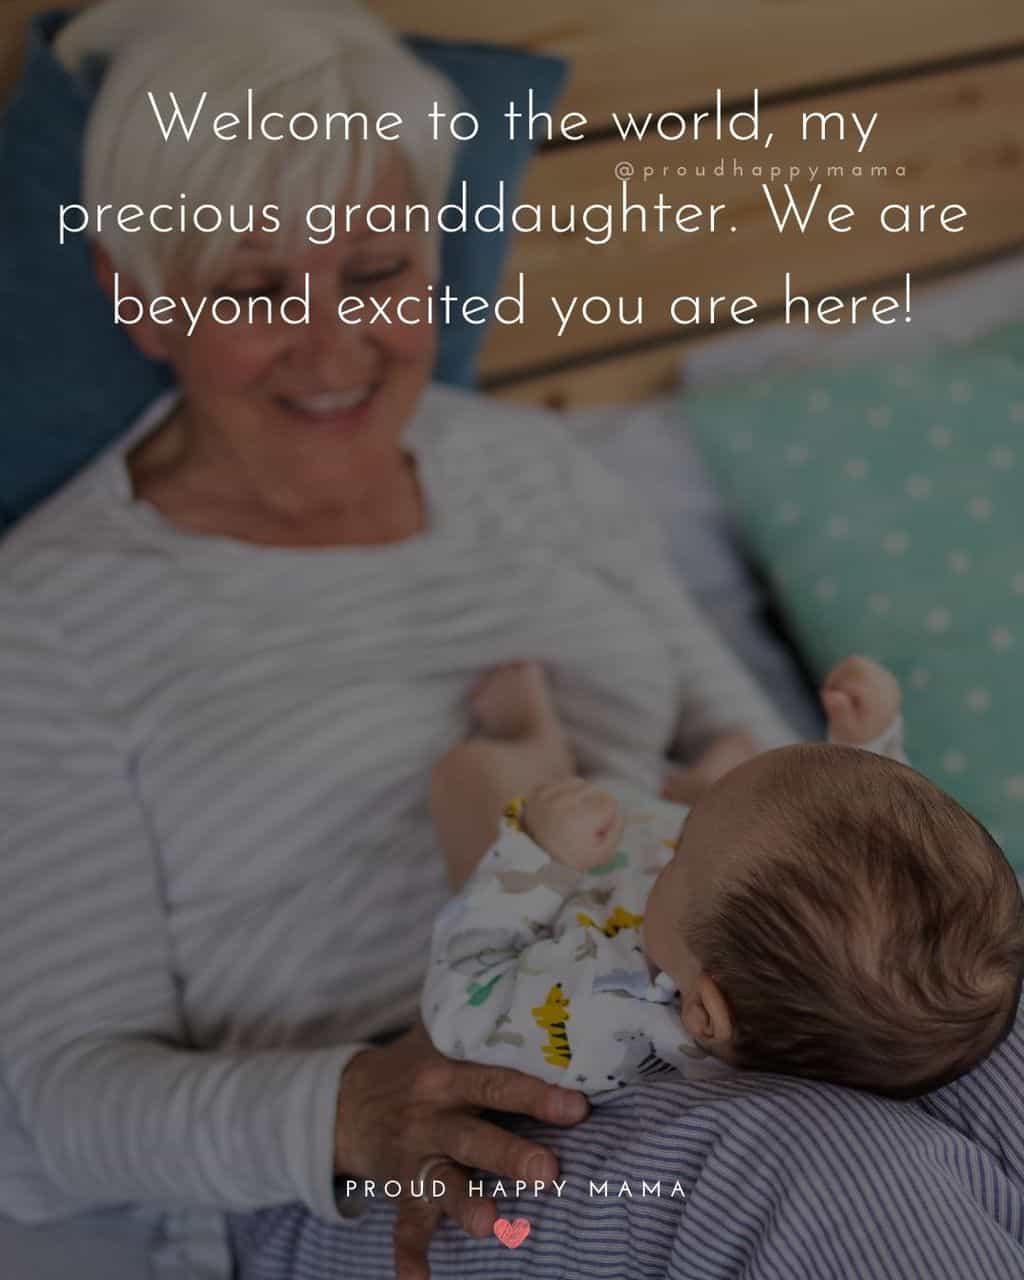 Granddaughter Quotes - Welcome to the world, my precious granddaughter. We are beyond excited you are here!’